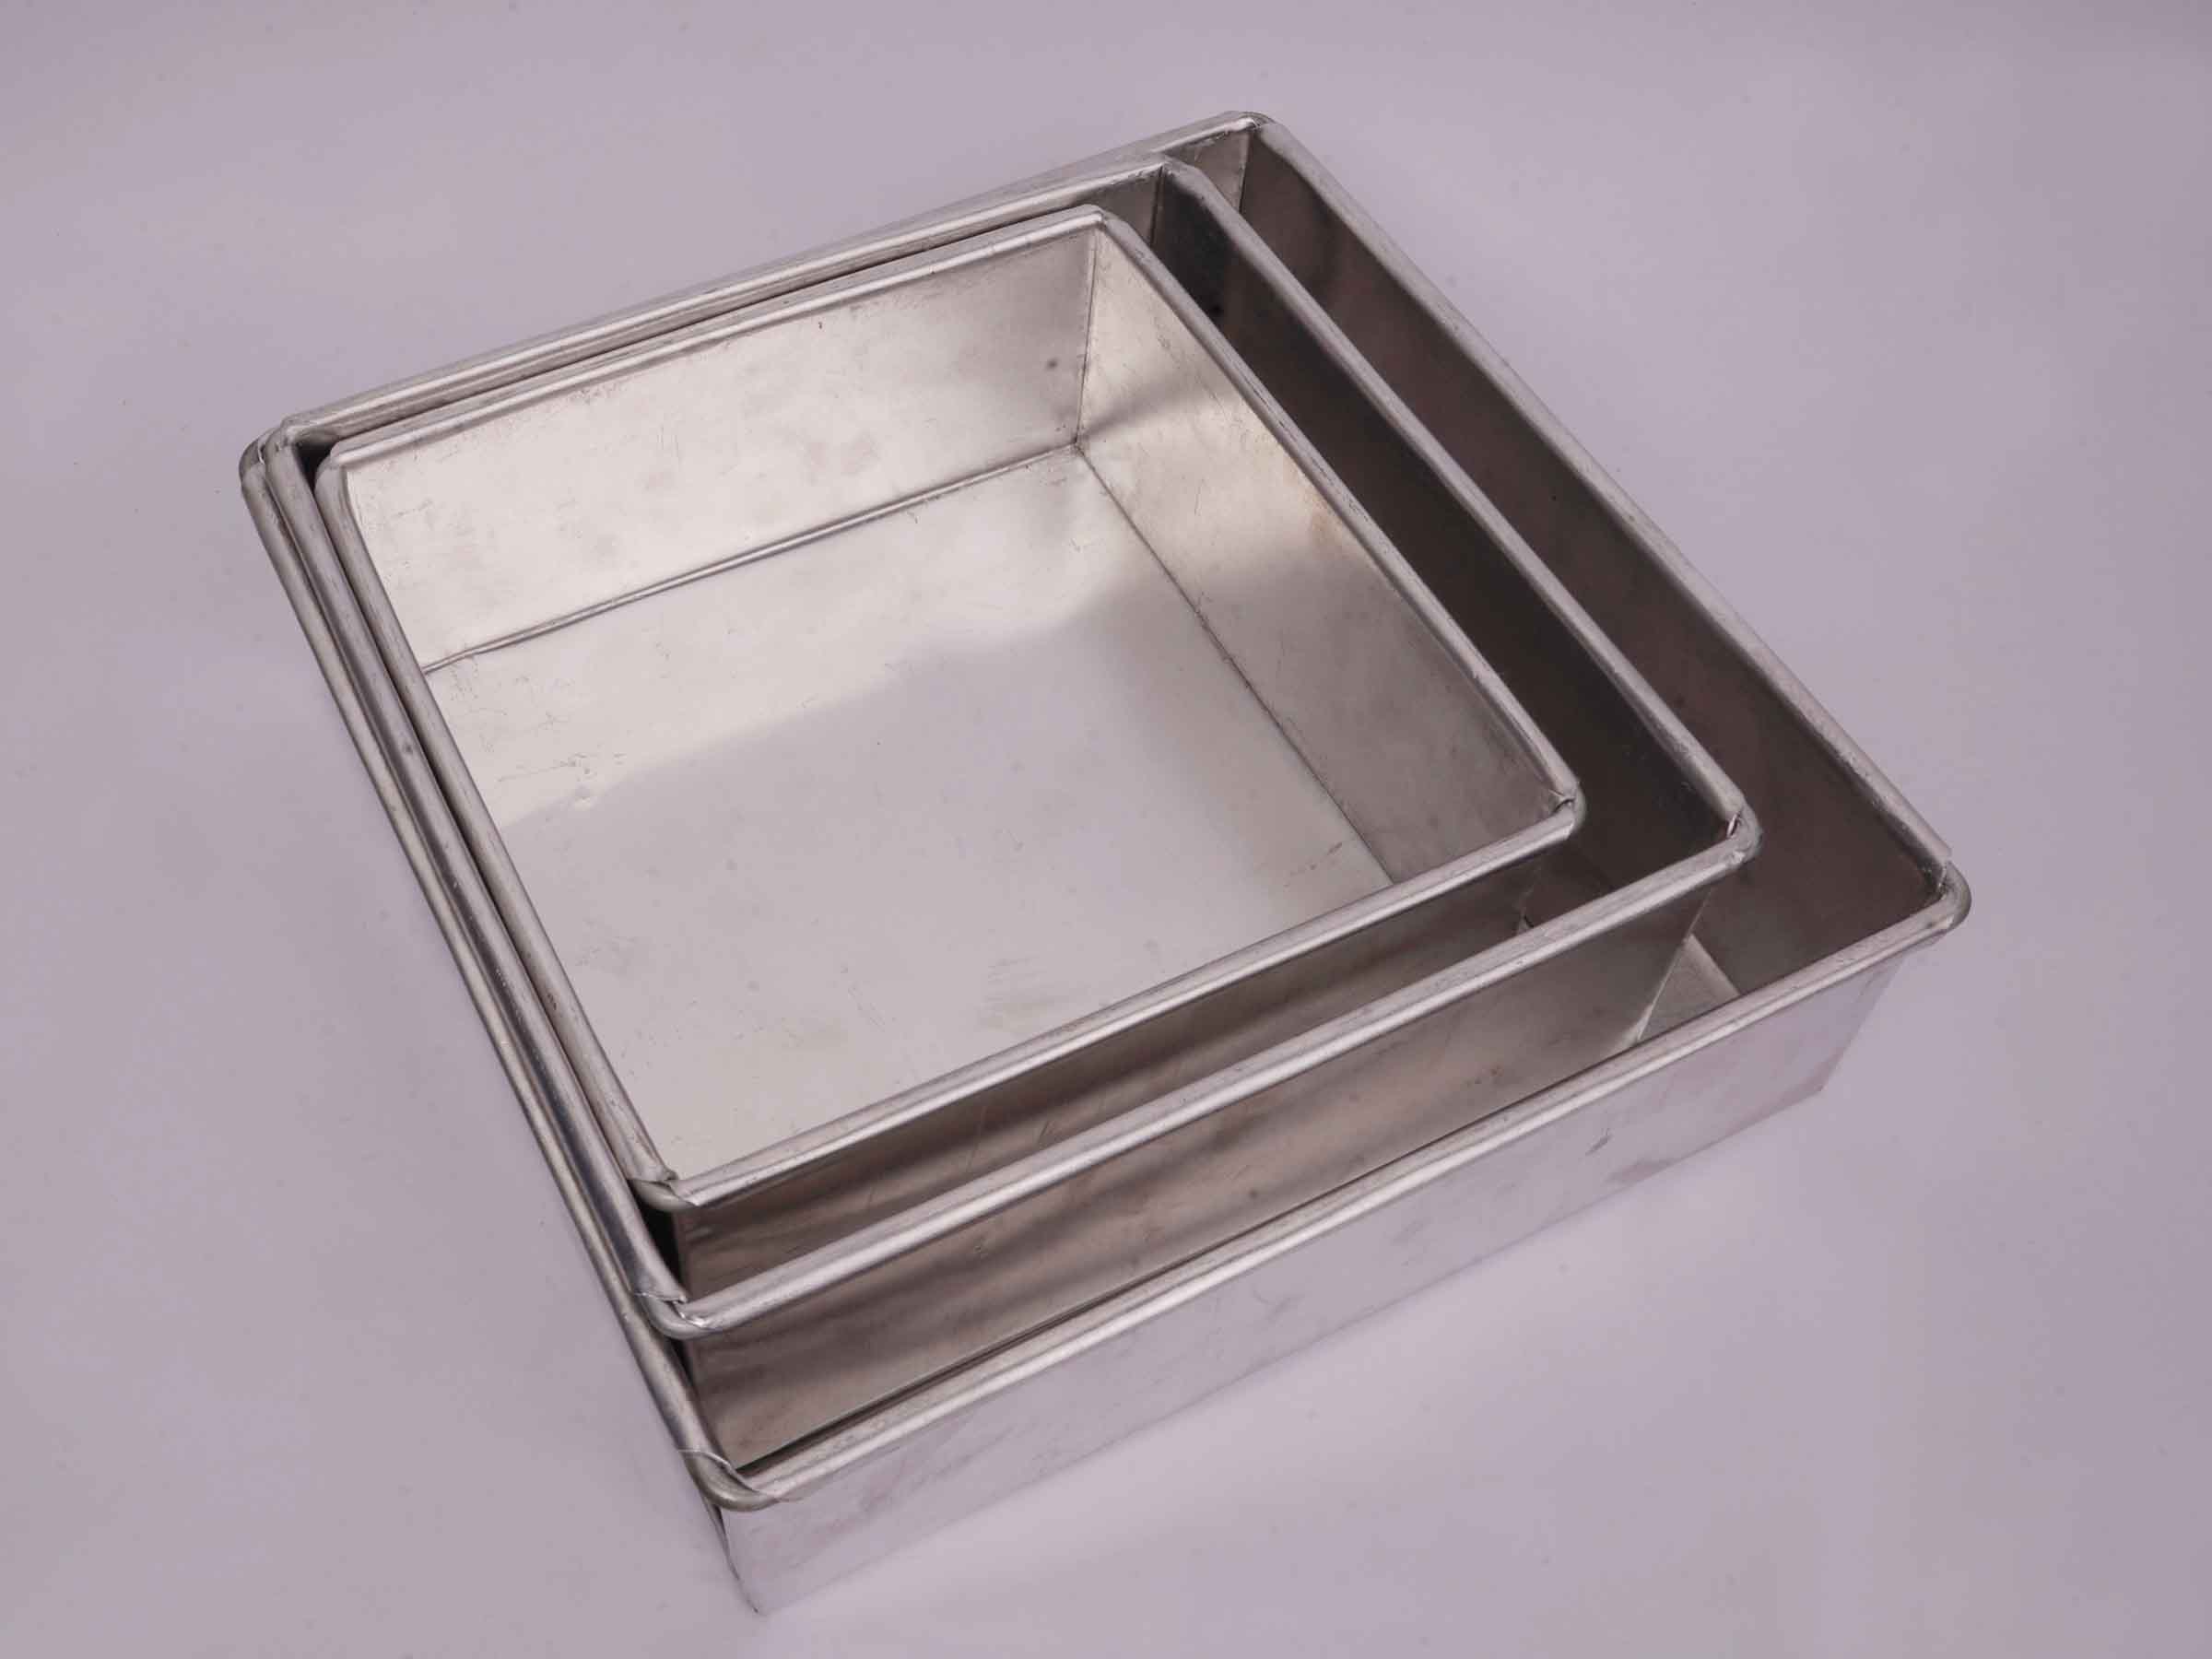 Aluminium Cake Mould - Buy Square Cake Mould 5 Inches & 3 Inches